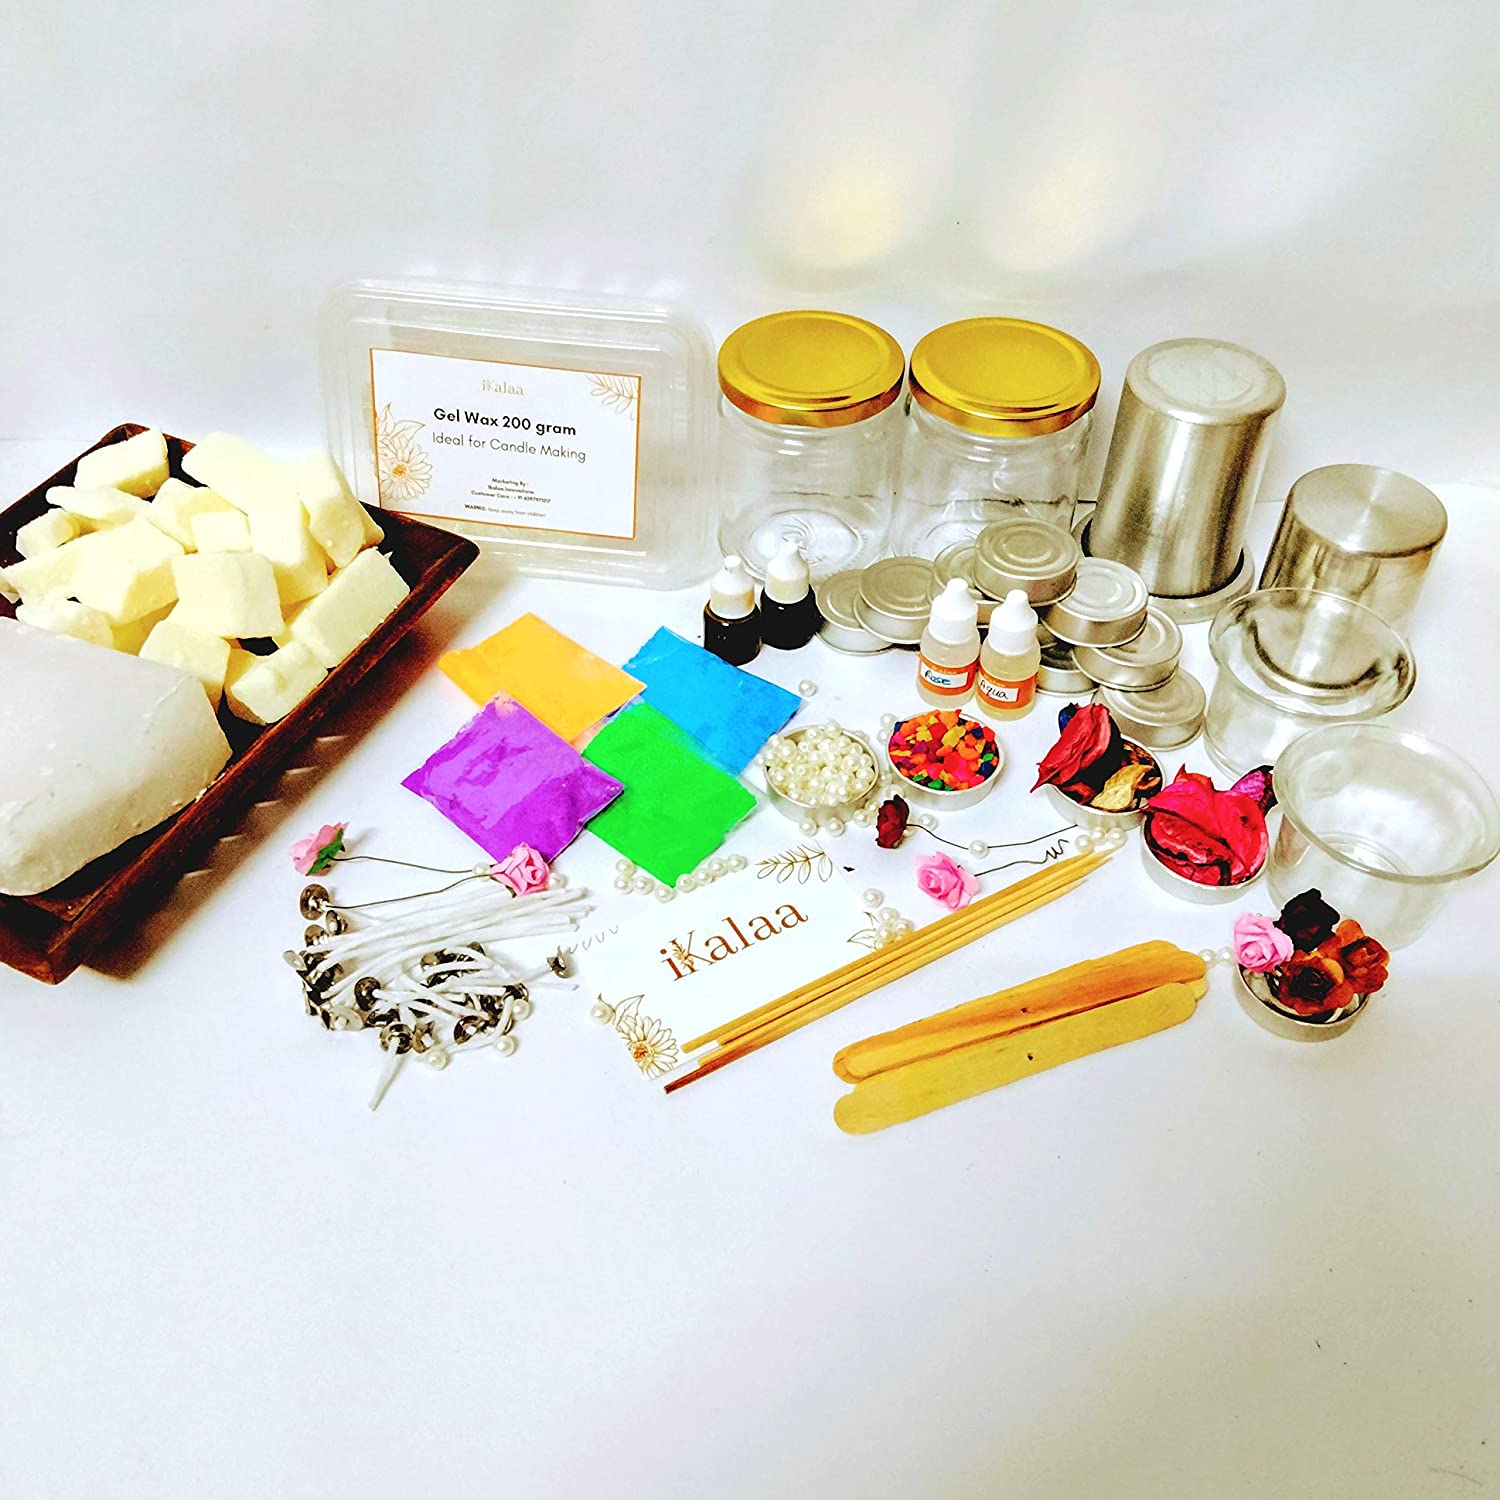 Get Started in Candle Making with These Kits